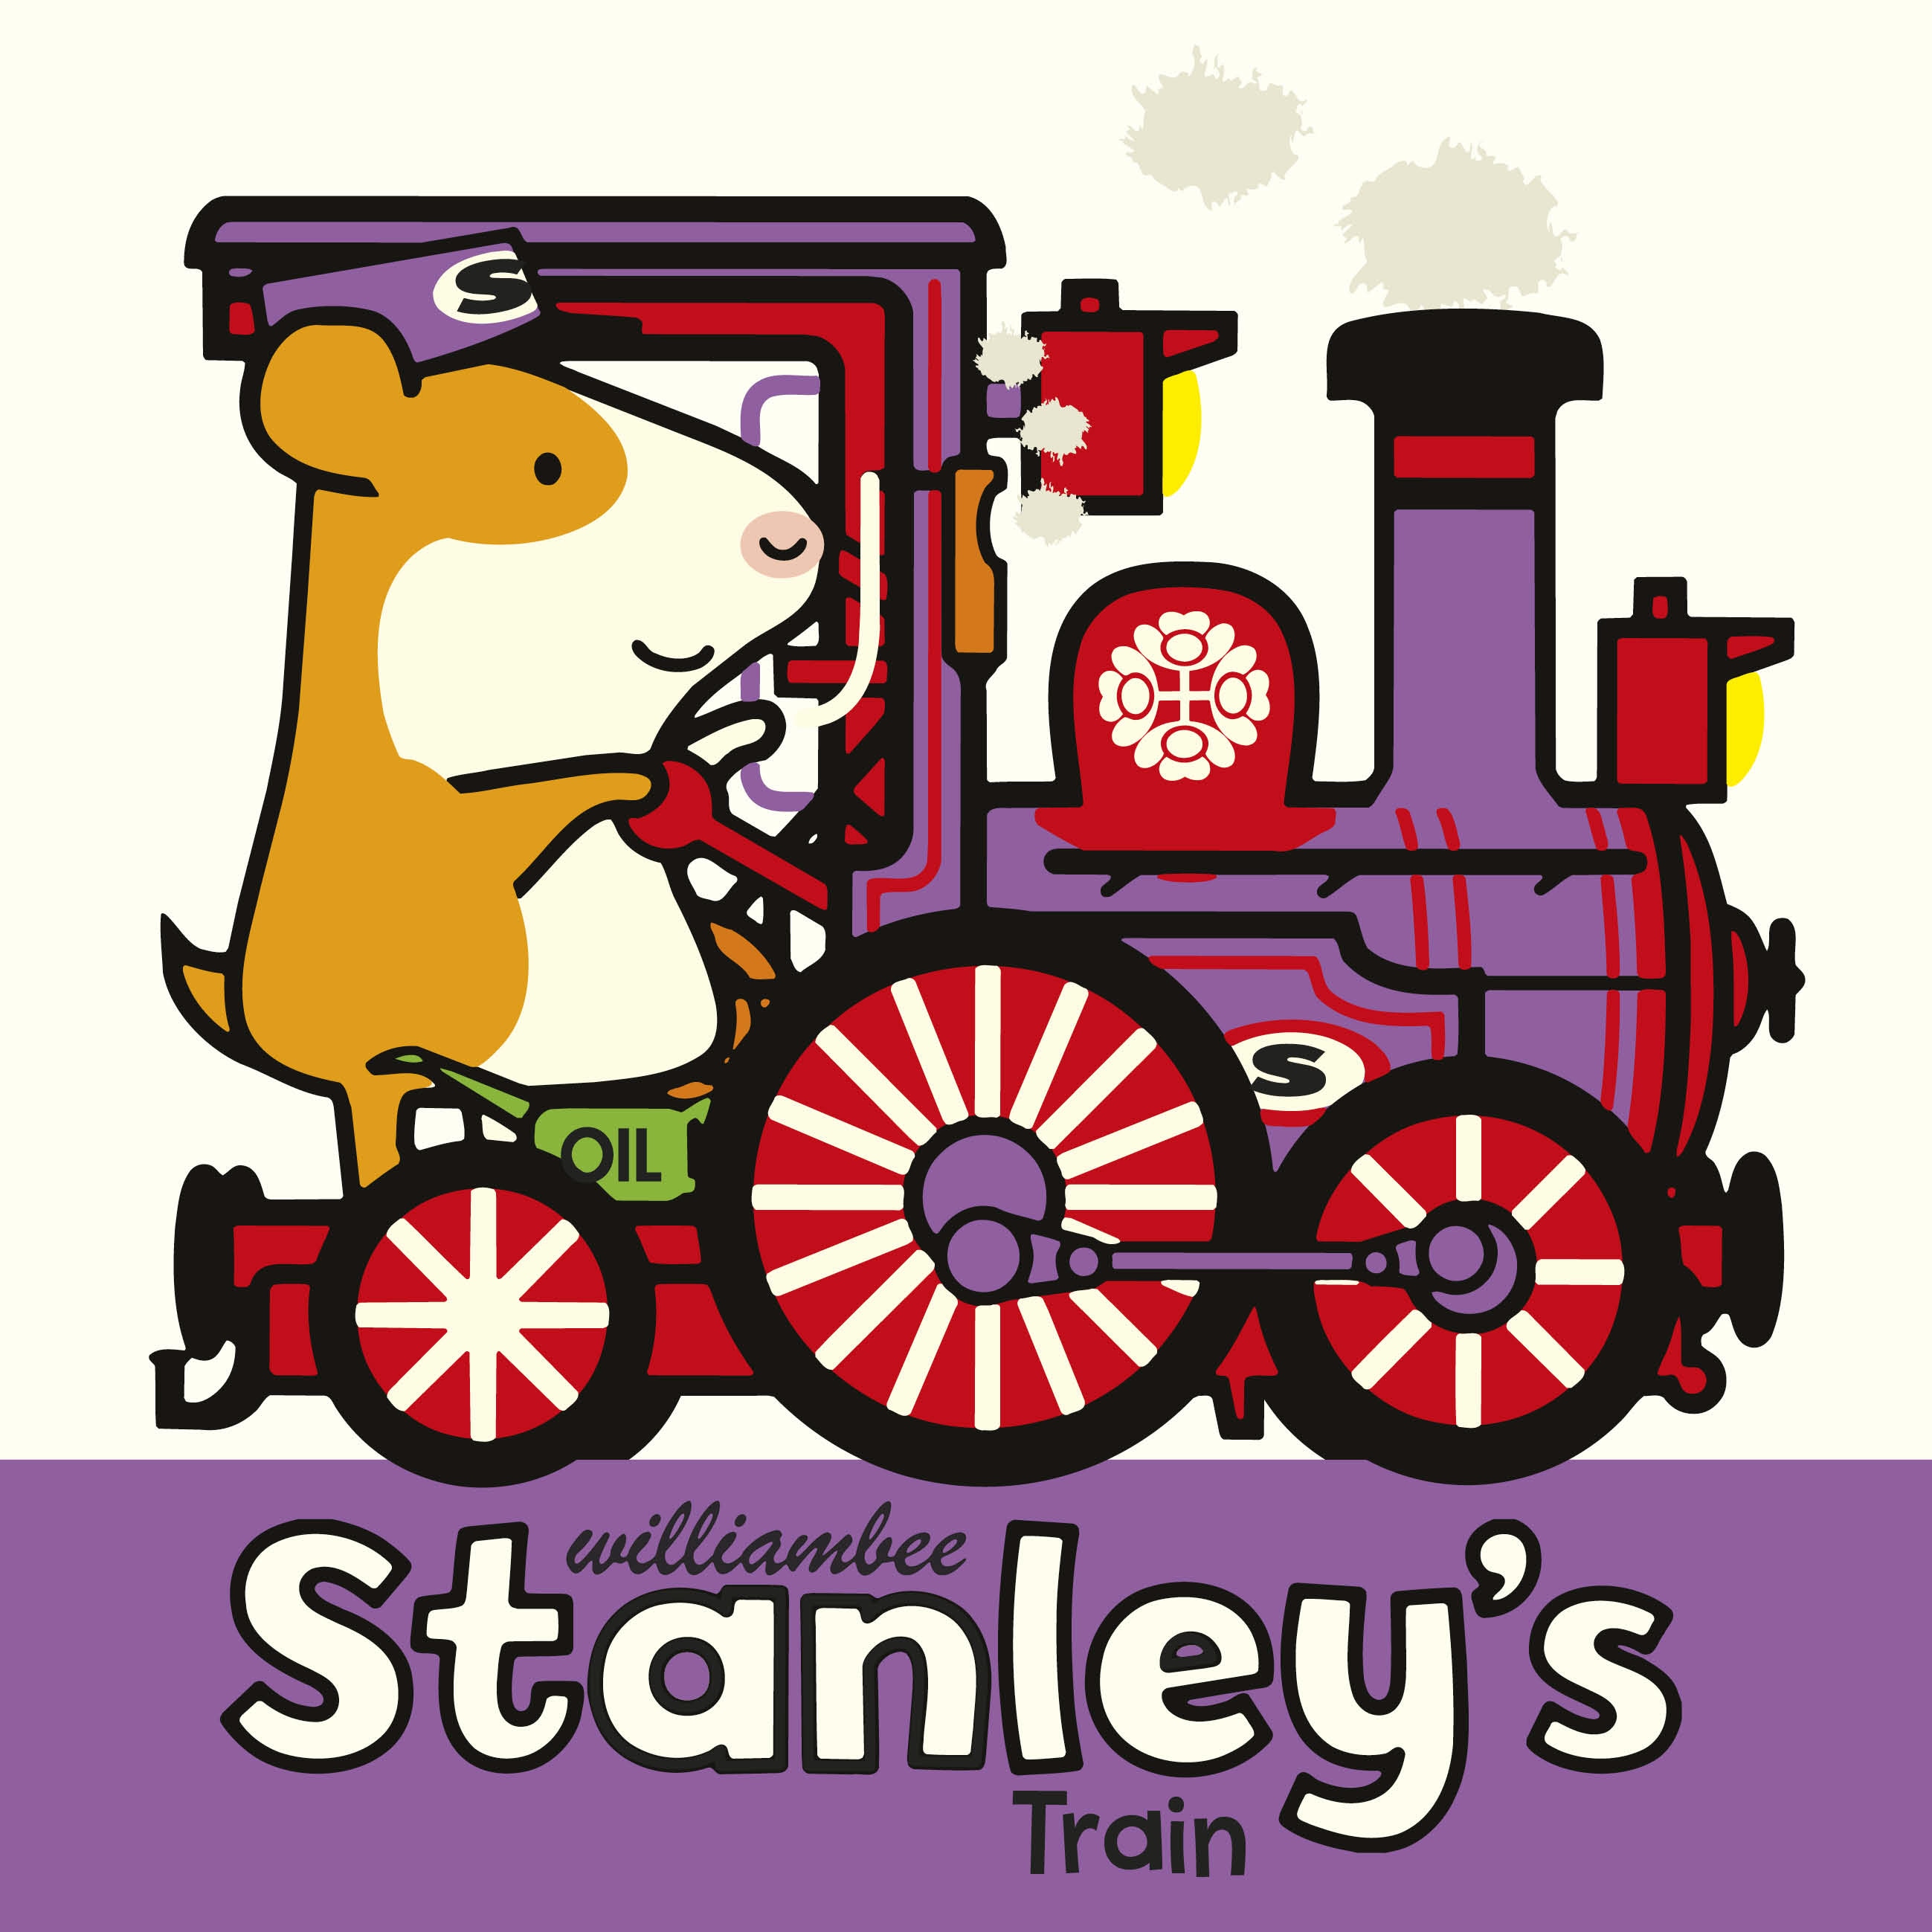 Book “Stanley's Train” by William Bee, Sue Buswell — September 5, 2019